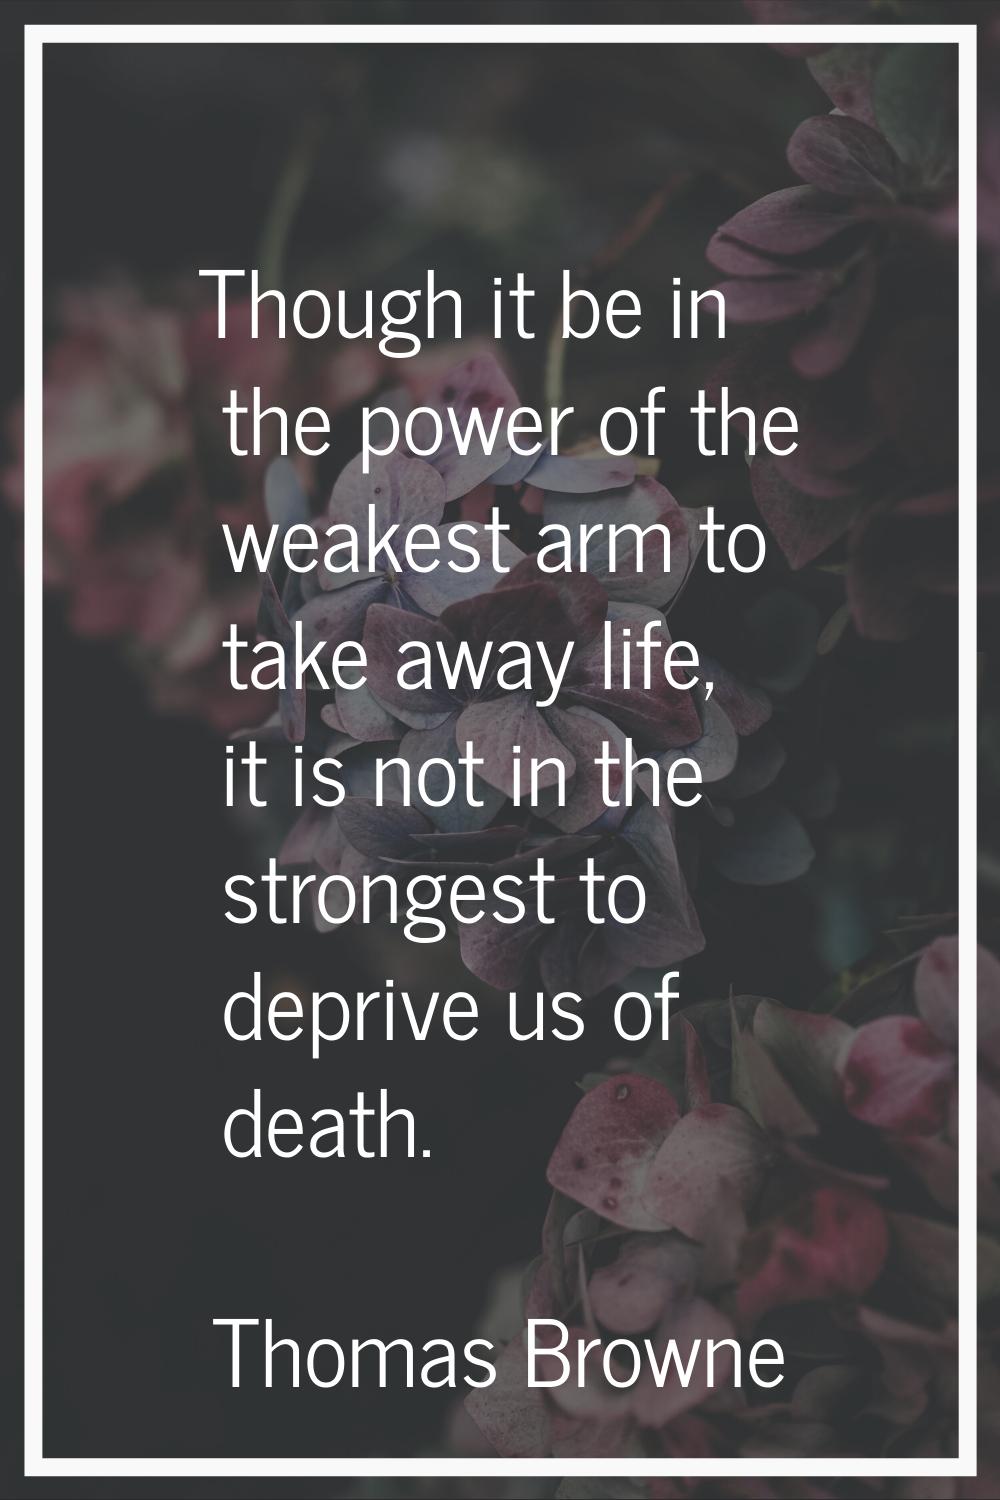 Though it be in the power of the weakest arm to take away life, it is not in the strongest to depri